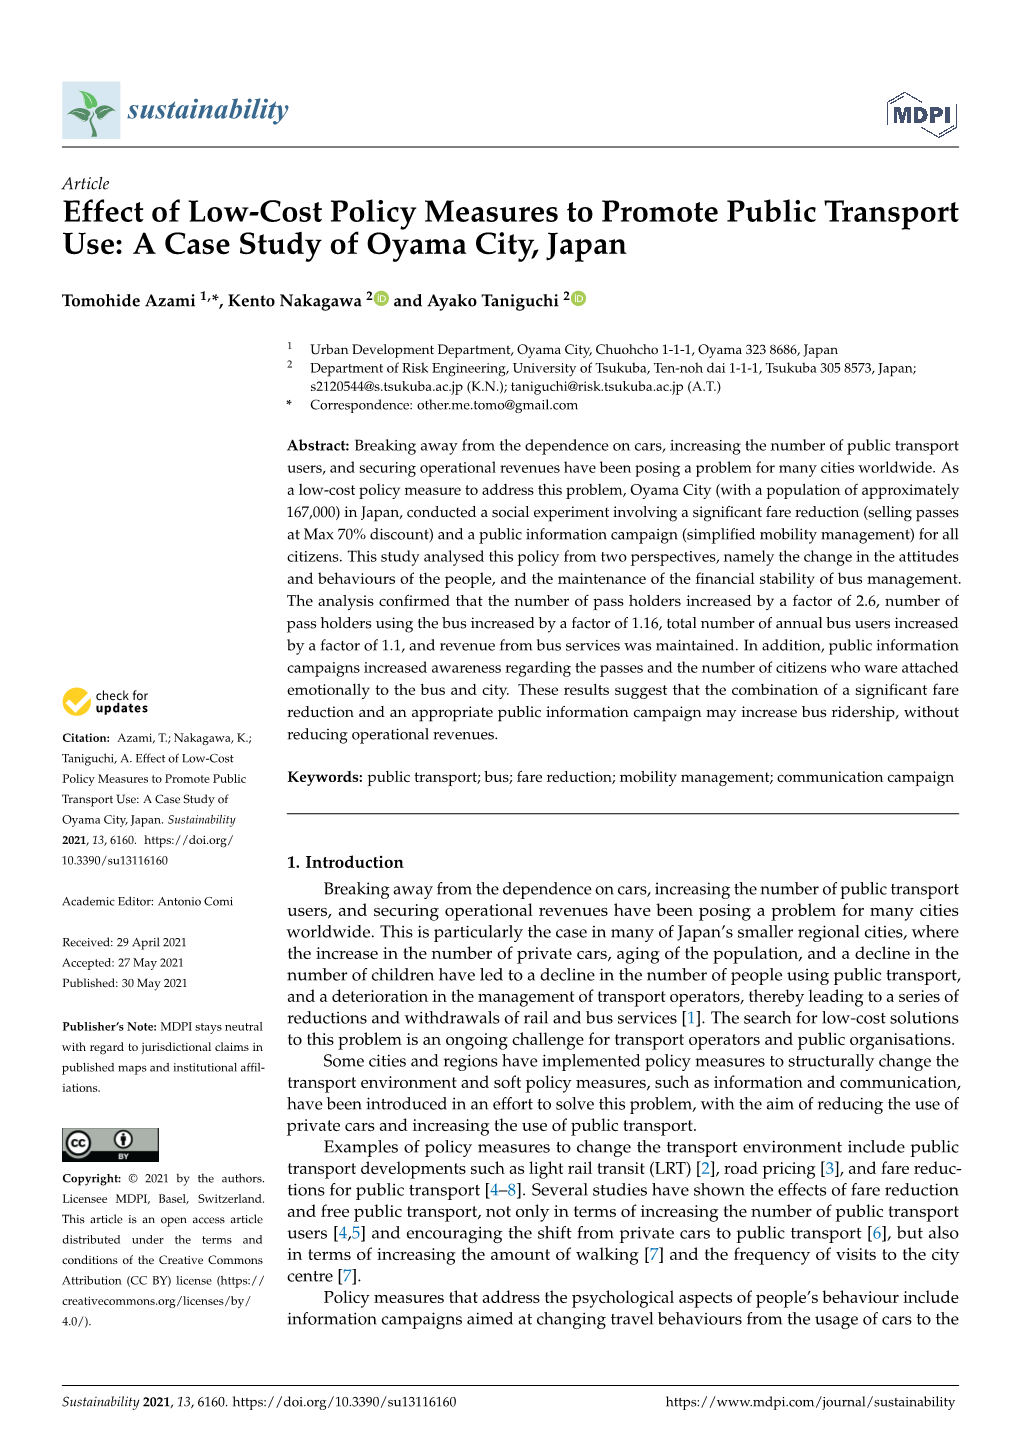 Effect of Low-Cost Policy Measures to Promote Public Transport Use: a Case Study of Oyama City, Japan